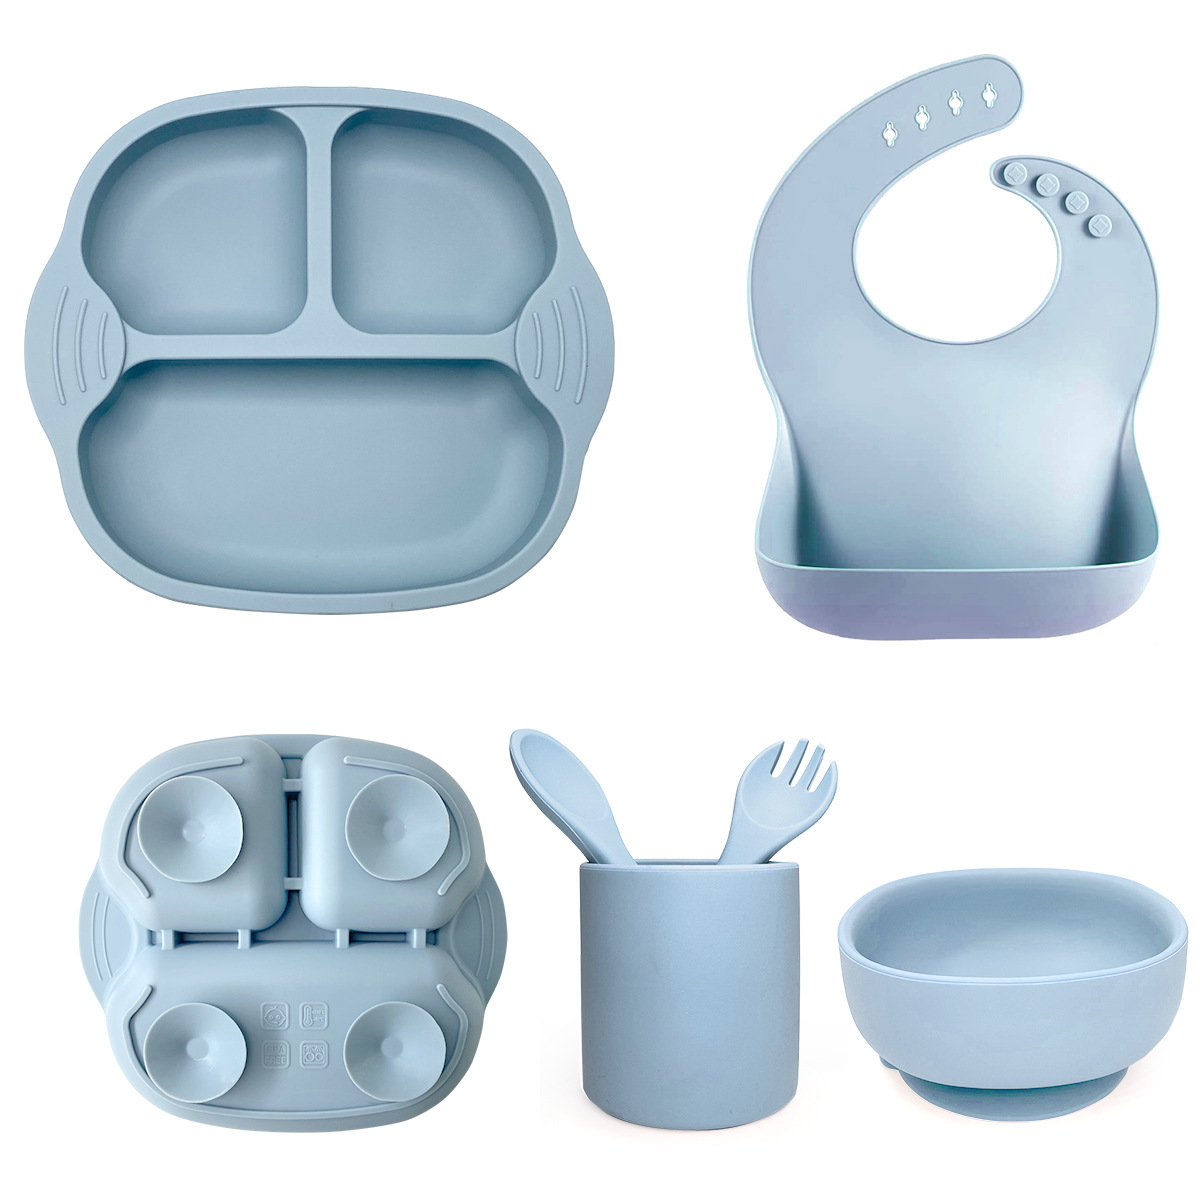 Baby Led Weaning Bowls, Plates and Spoons